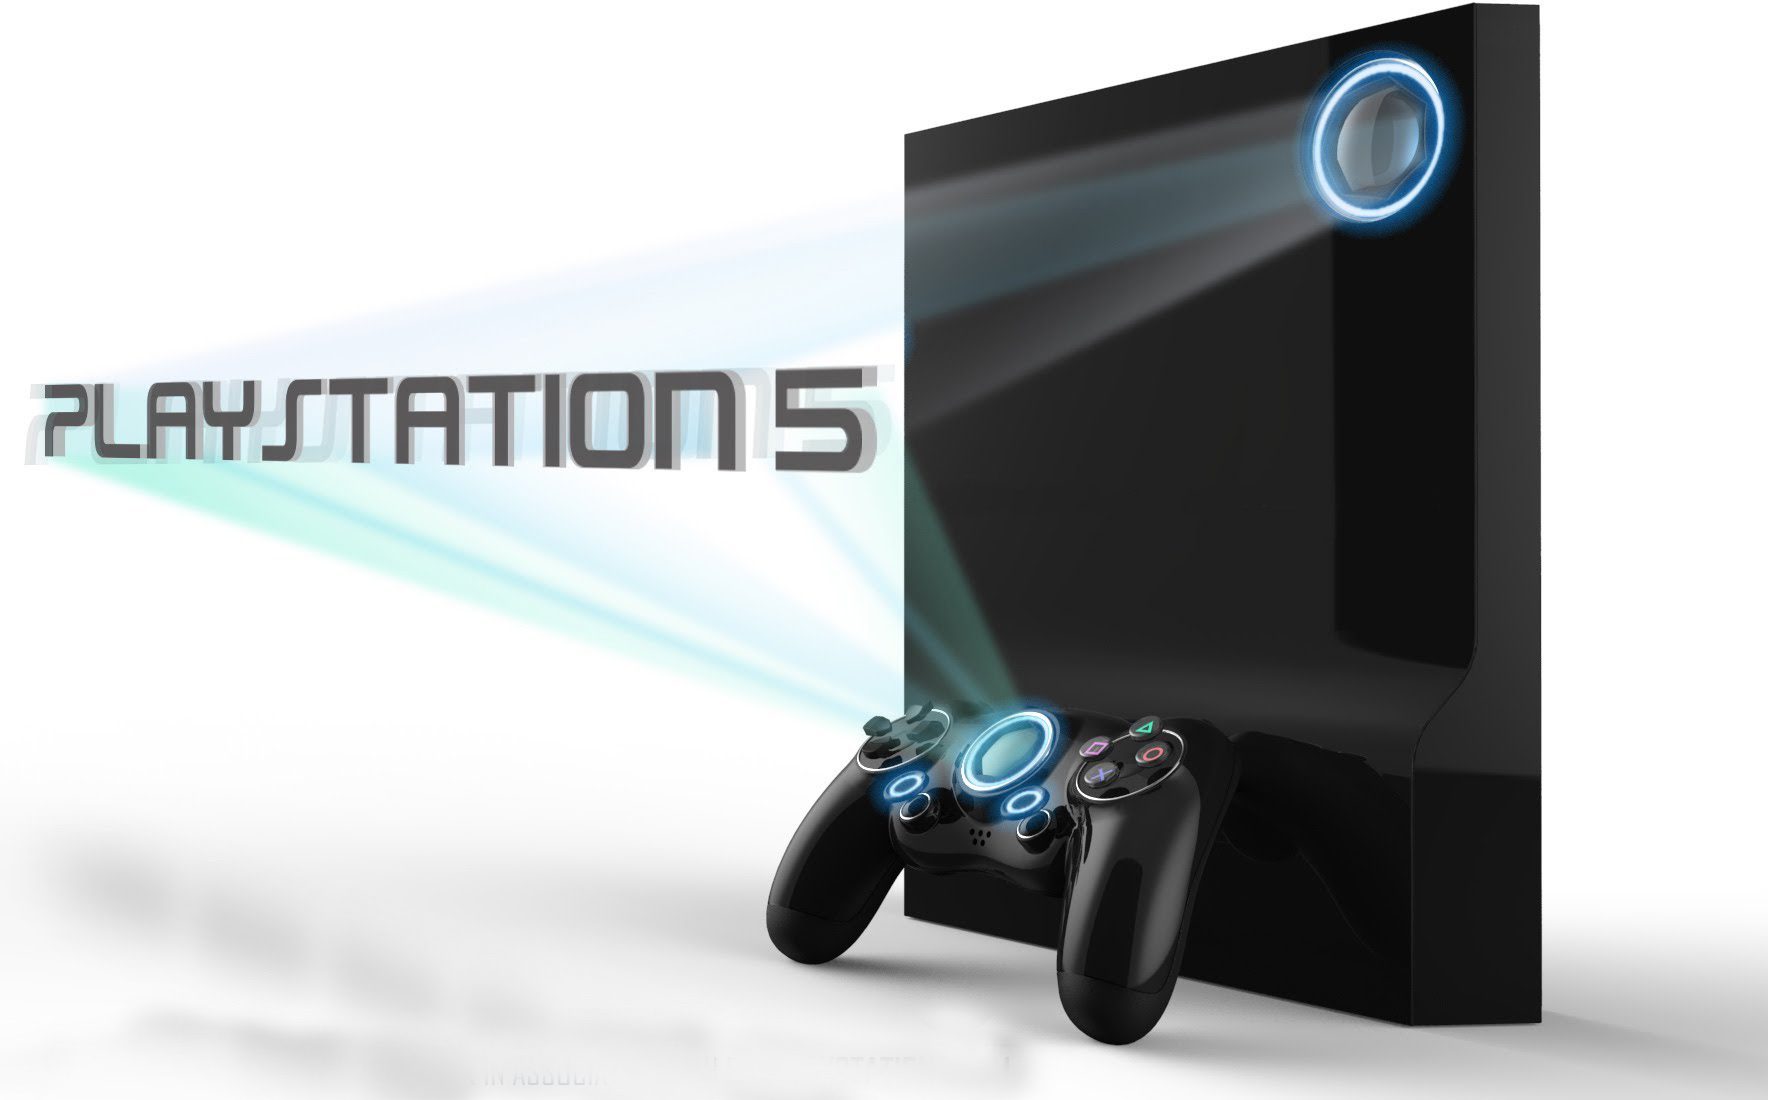 Ps5 12. Sony PLAYSTATION 5. Ps5 Concept 2015. Sony PLAYSTATION 5 игры. PLAYSTATION 5 картинки.